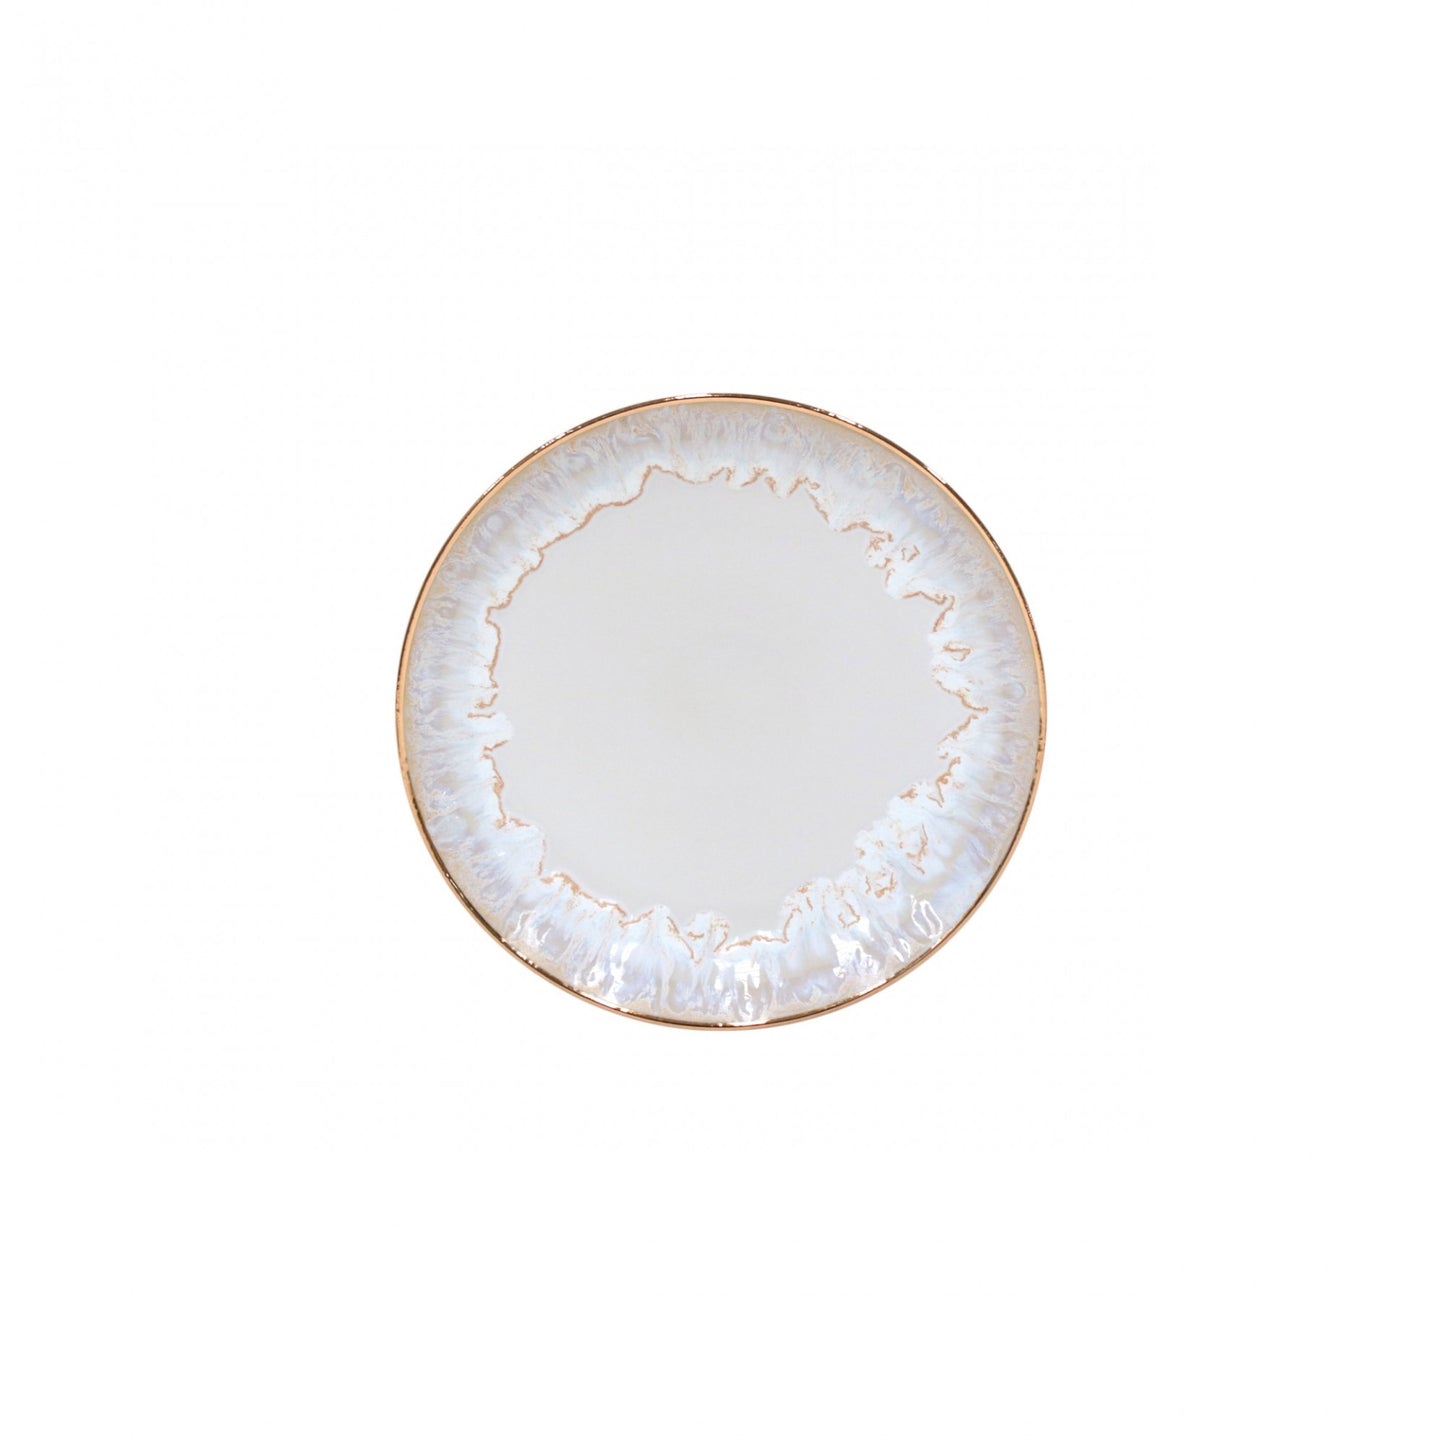 Taormina by Casafina Place Setting (sold separately)